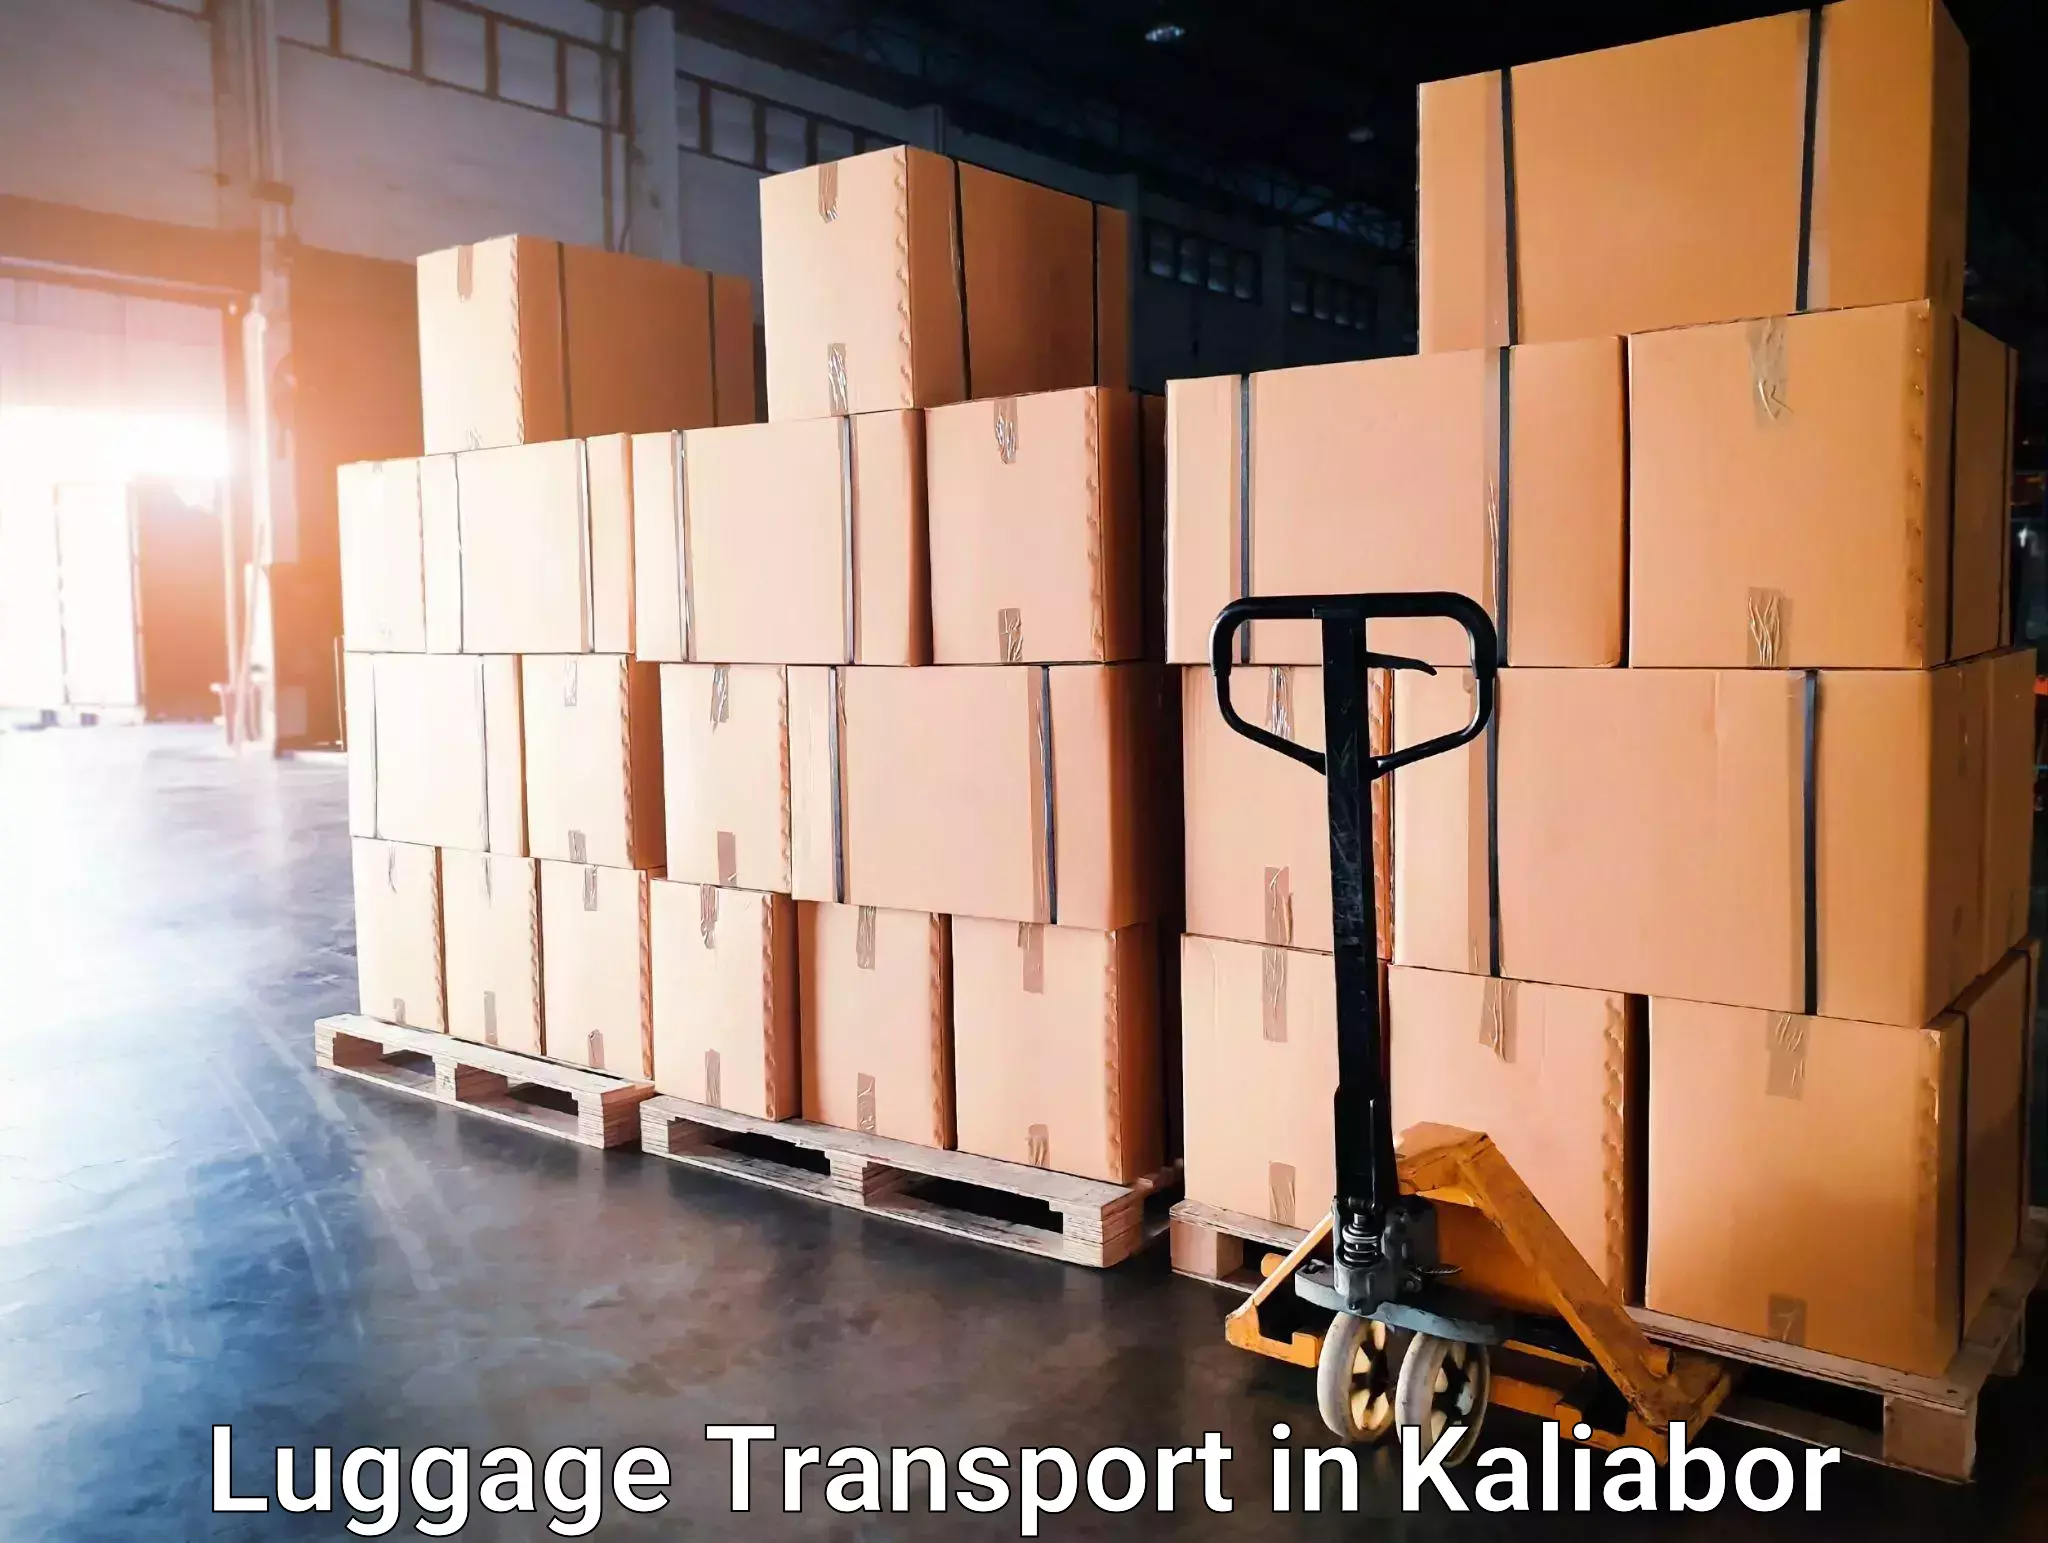 Luggage transport consultancy in Kaliabor